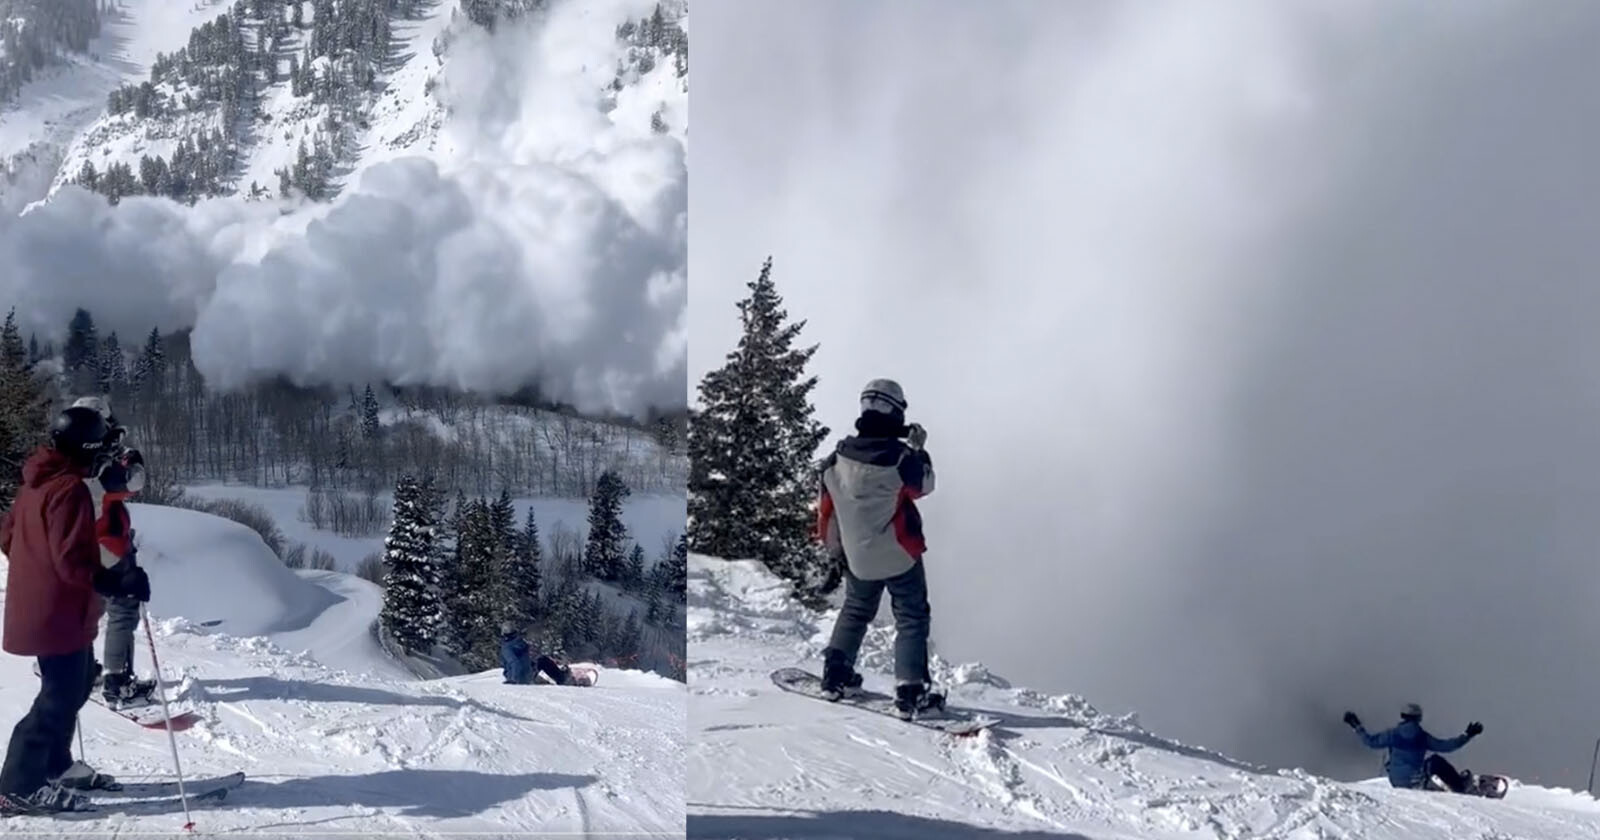 Wild Footage of Enormous Powder Cloud Avalanche Engulfing Skiers